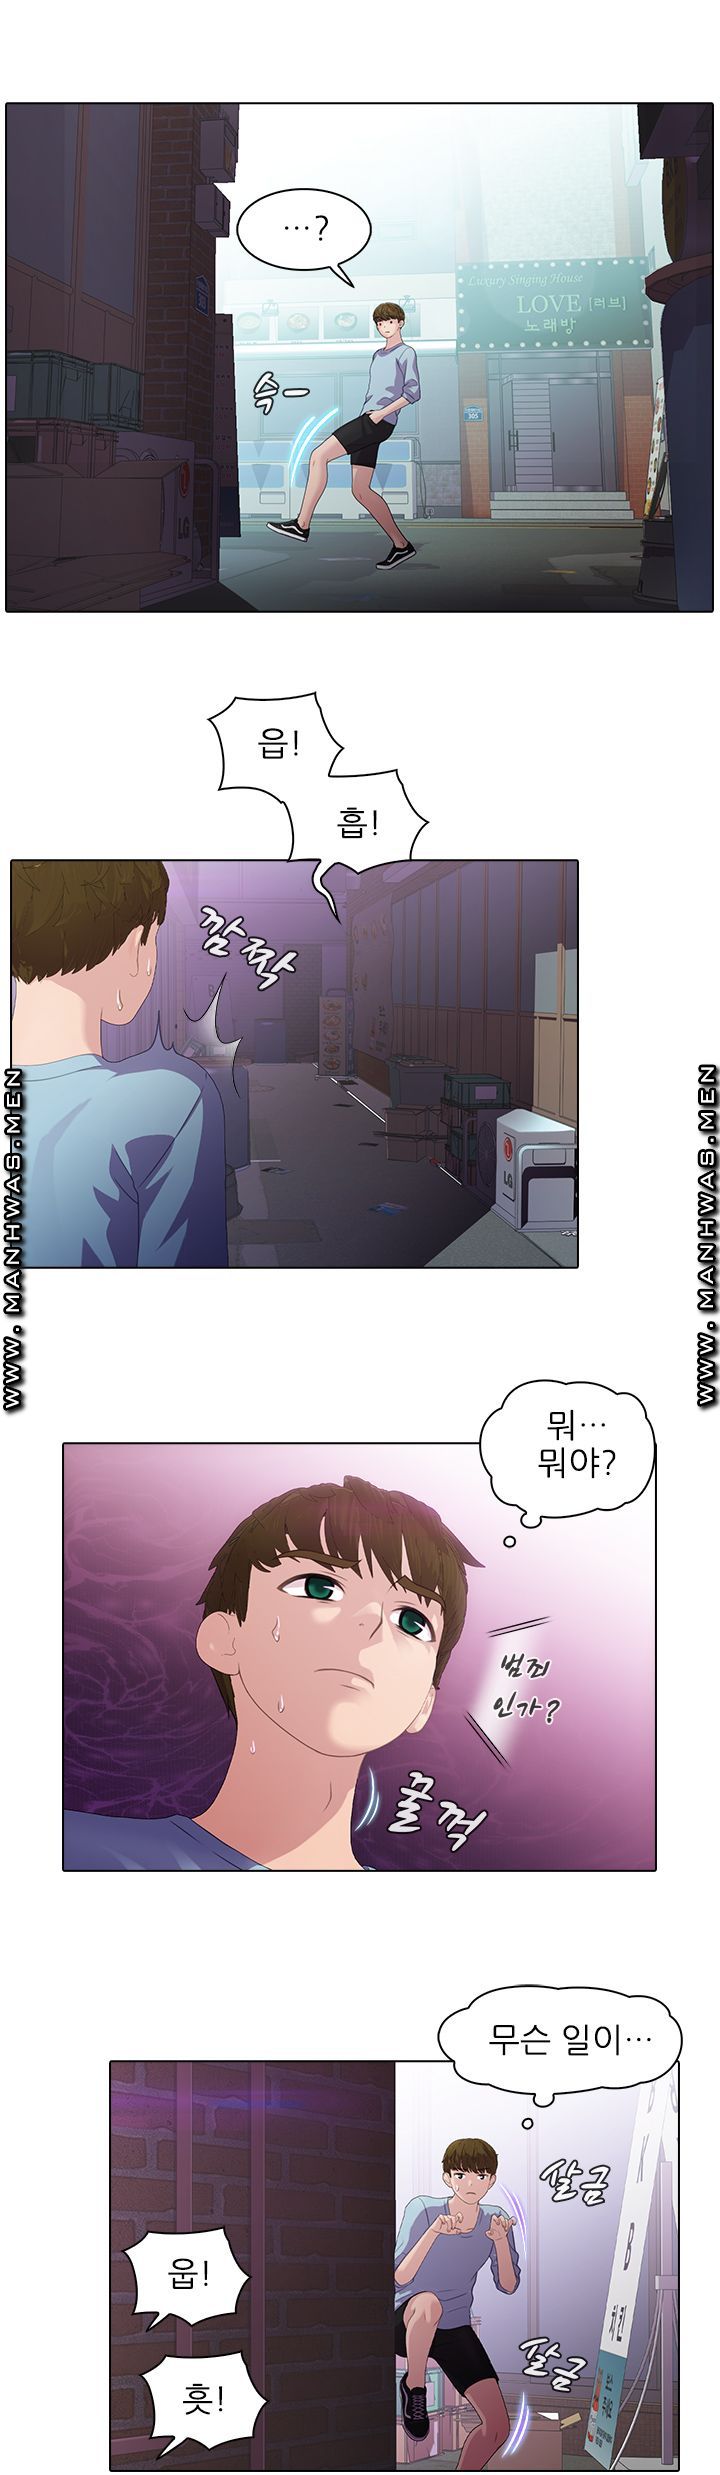 Sister's Friend Raw - Chapter 4 Page 6